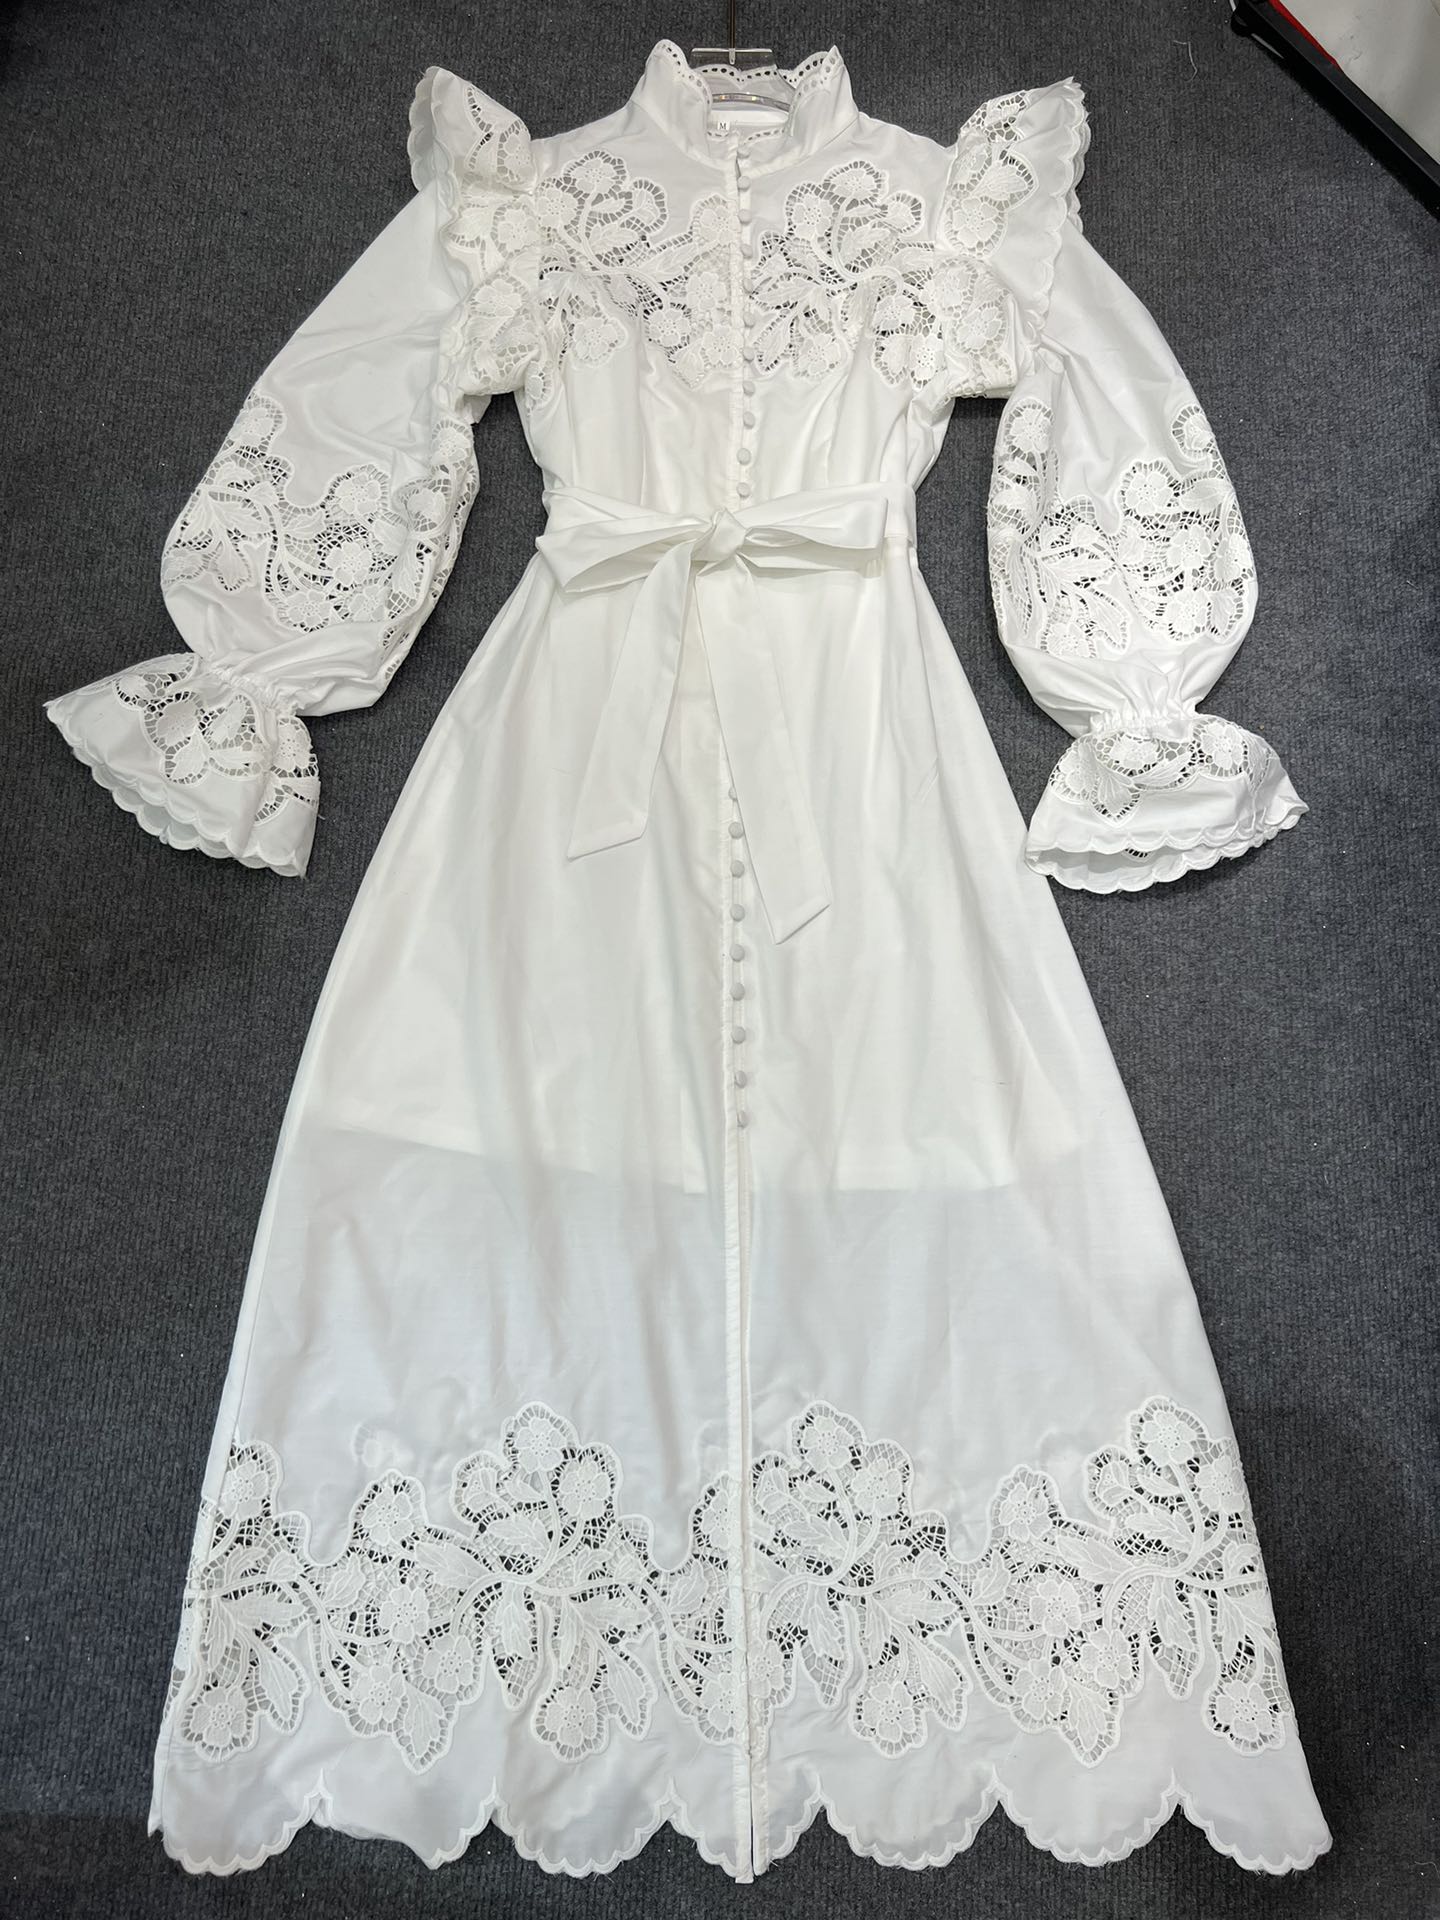 Designer dress with hollowed out embroidery and ruffled edges for a slim waist long sleeved holiday dress